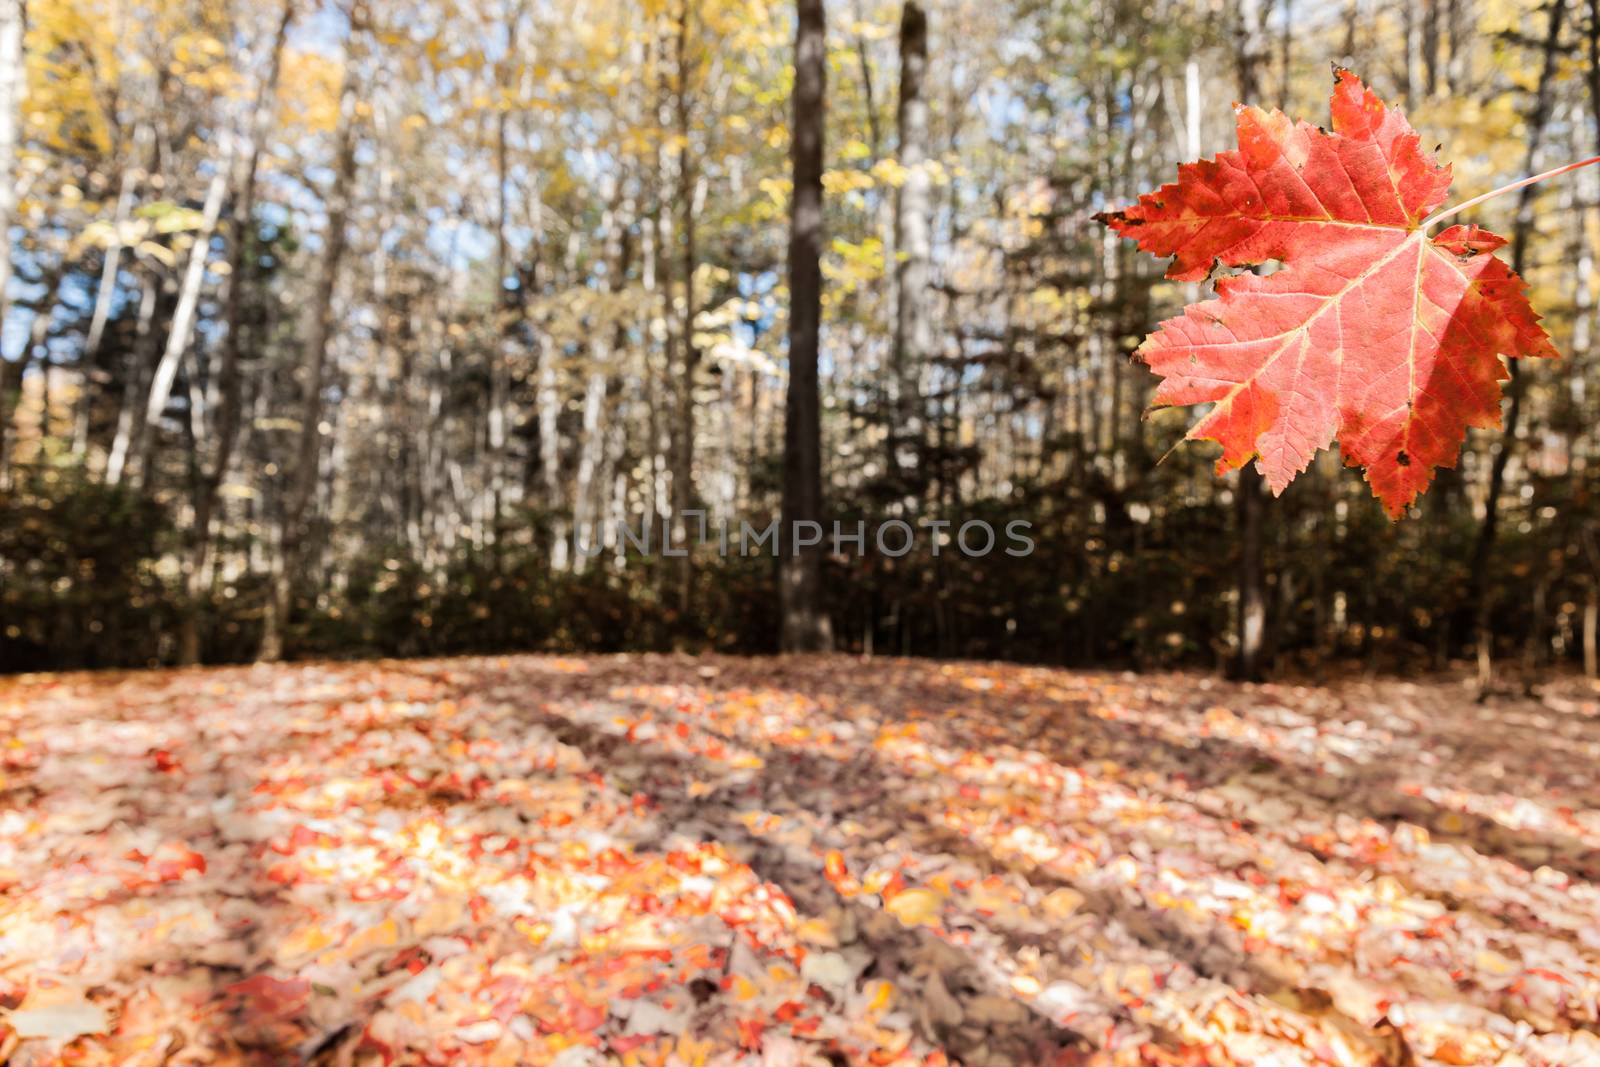 Heavy and colorful leaf fall on ground under trees in selective focus around red leaf floating to ground in Umbagog State Park, USA.